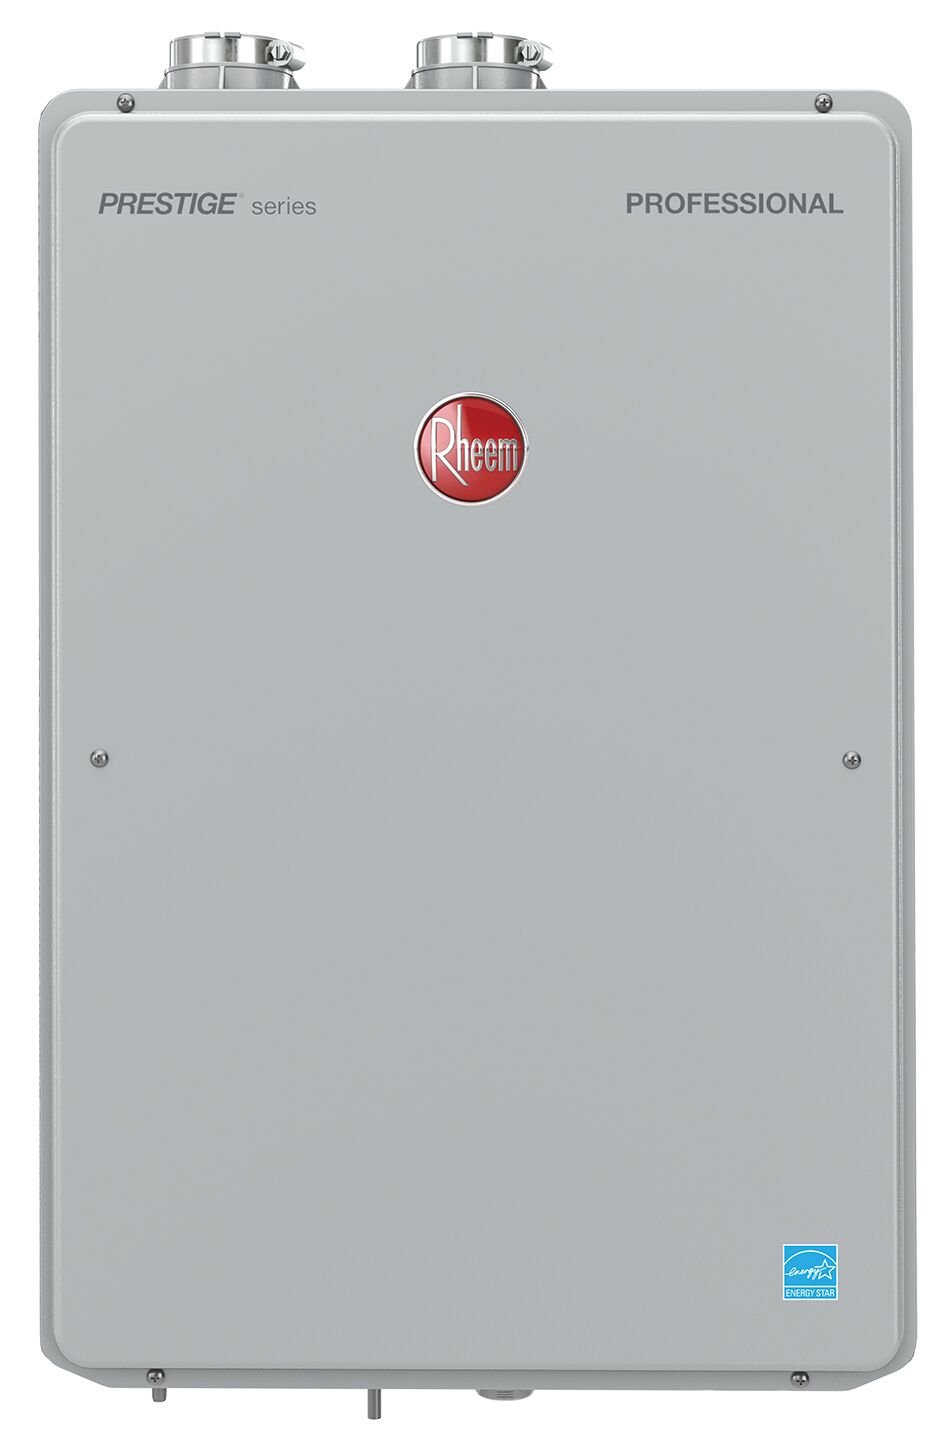 ! CONDENSING TANKLESS WATER HEATER NAT